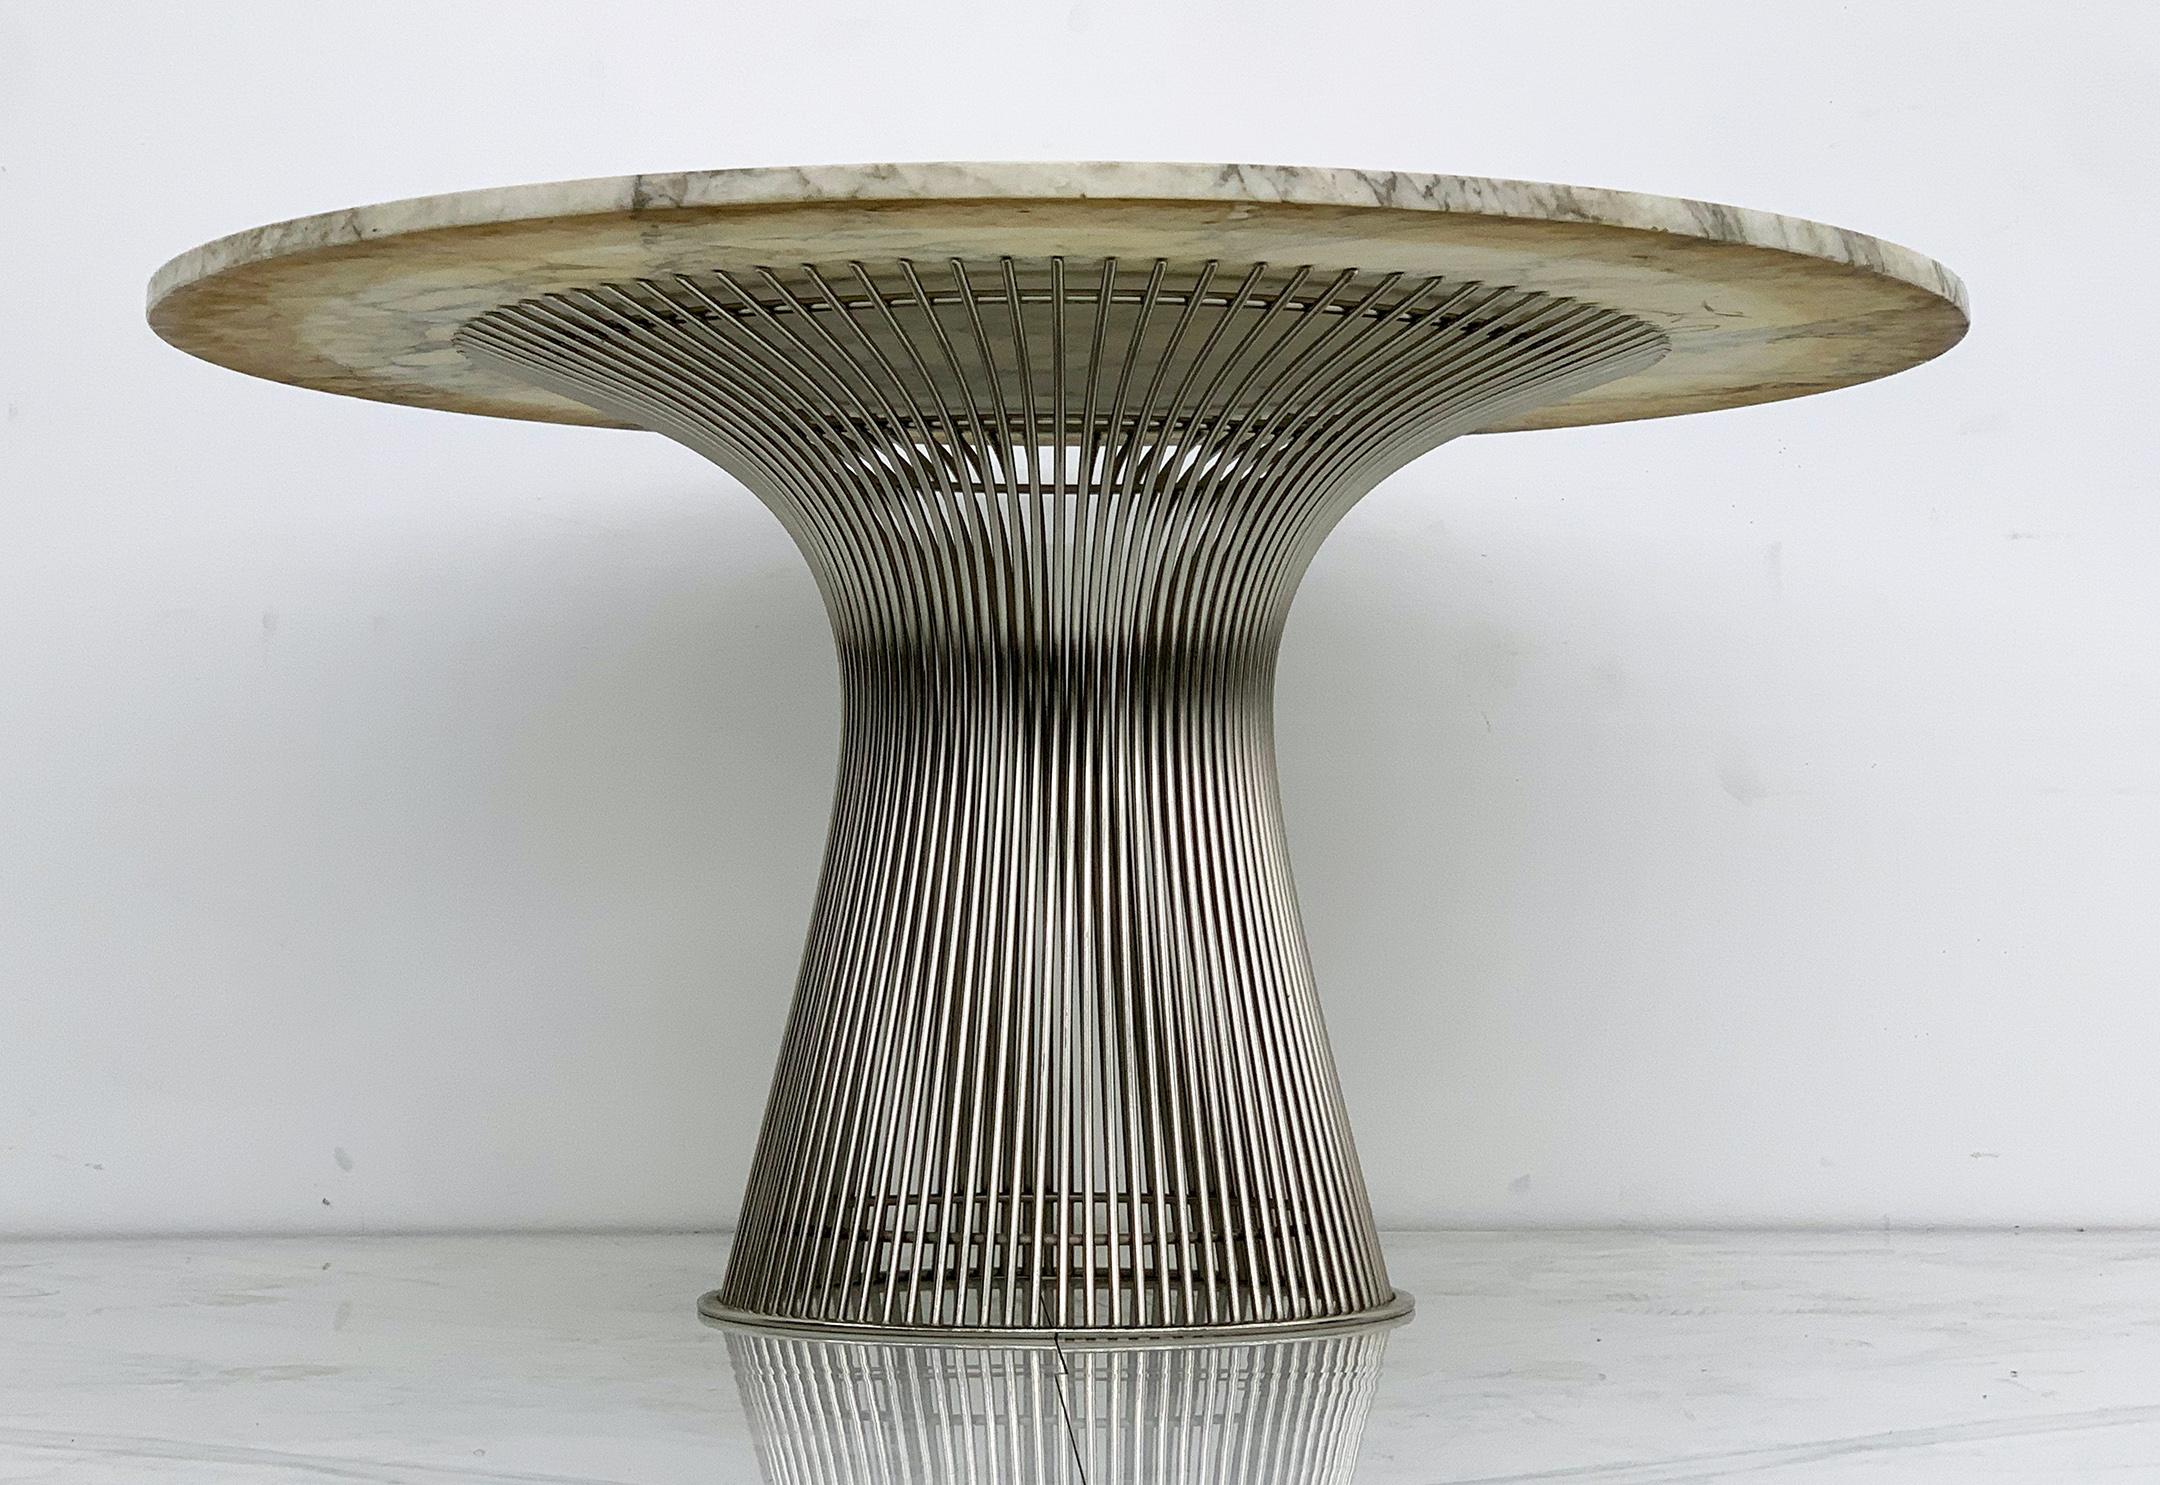 Nickel Warren Platner for Knoll Dining Table with Arabescato Marble Top